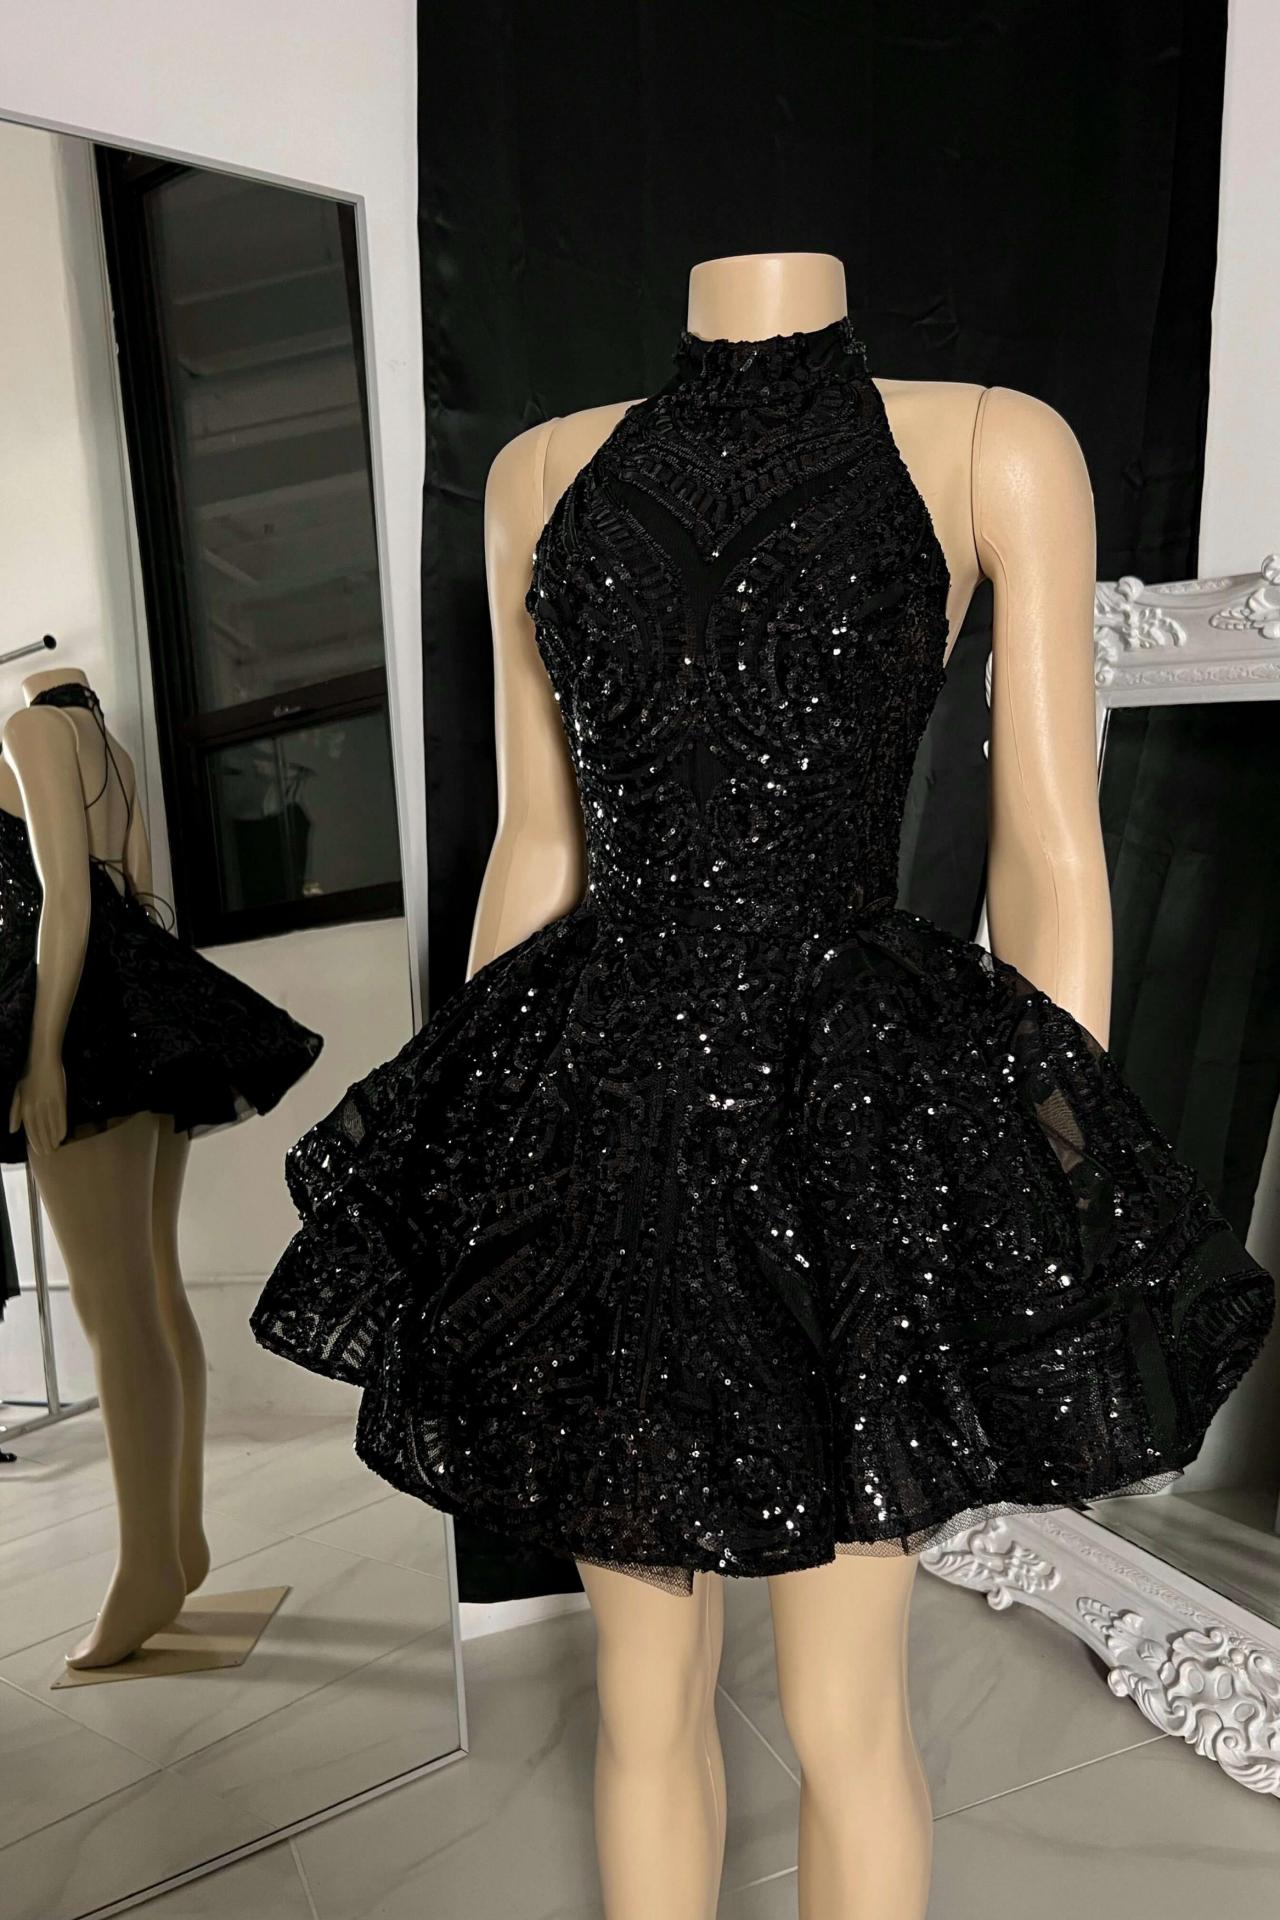 Party Dresses & Outfits, Birthday & Cocktail Dresses